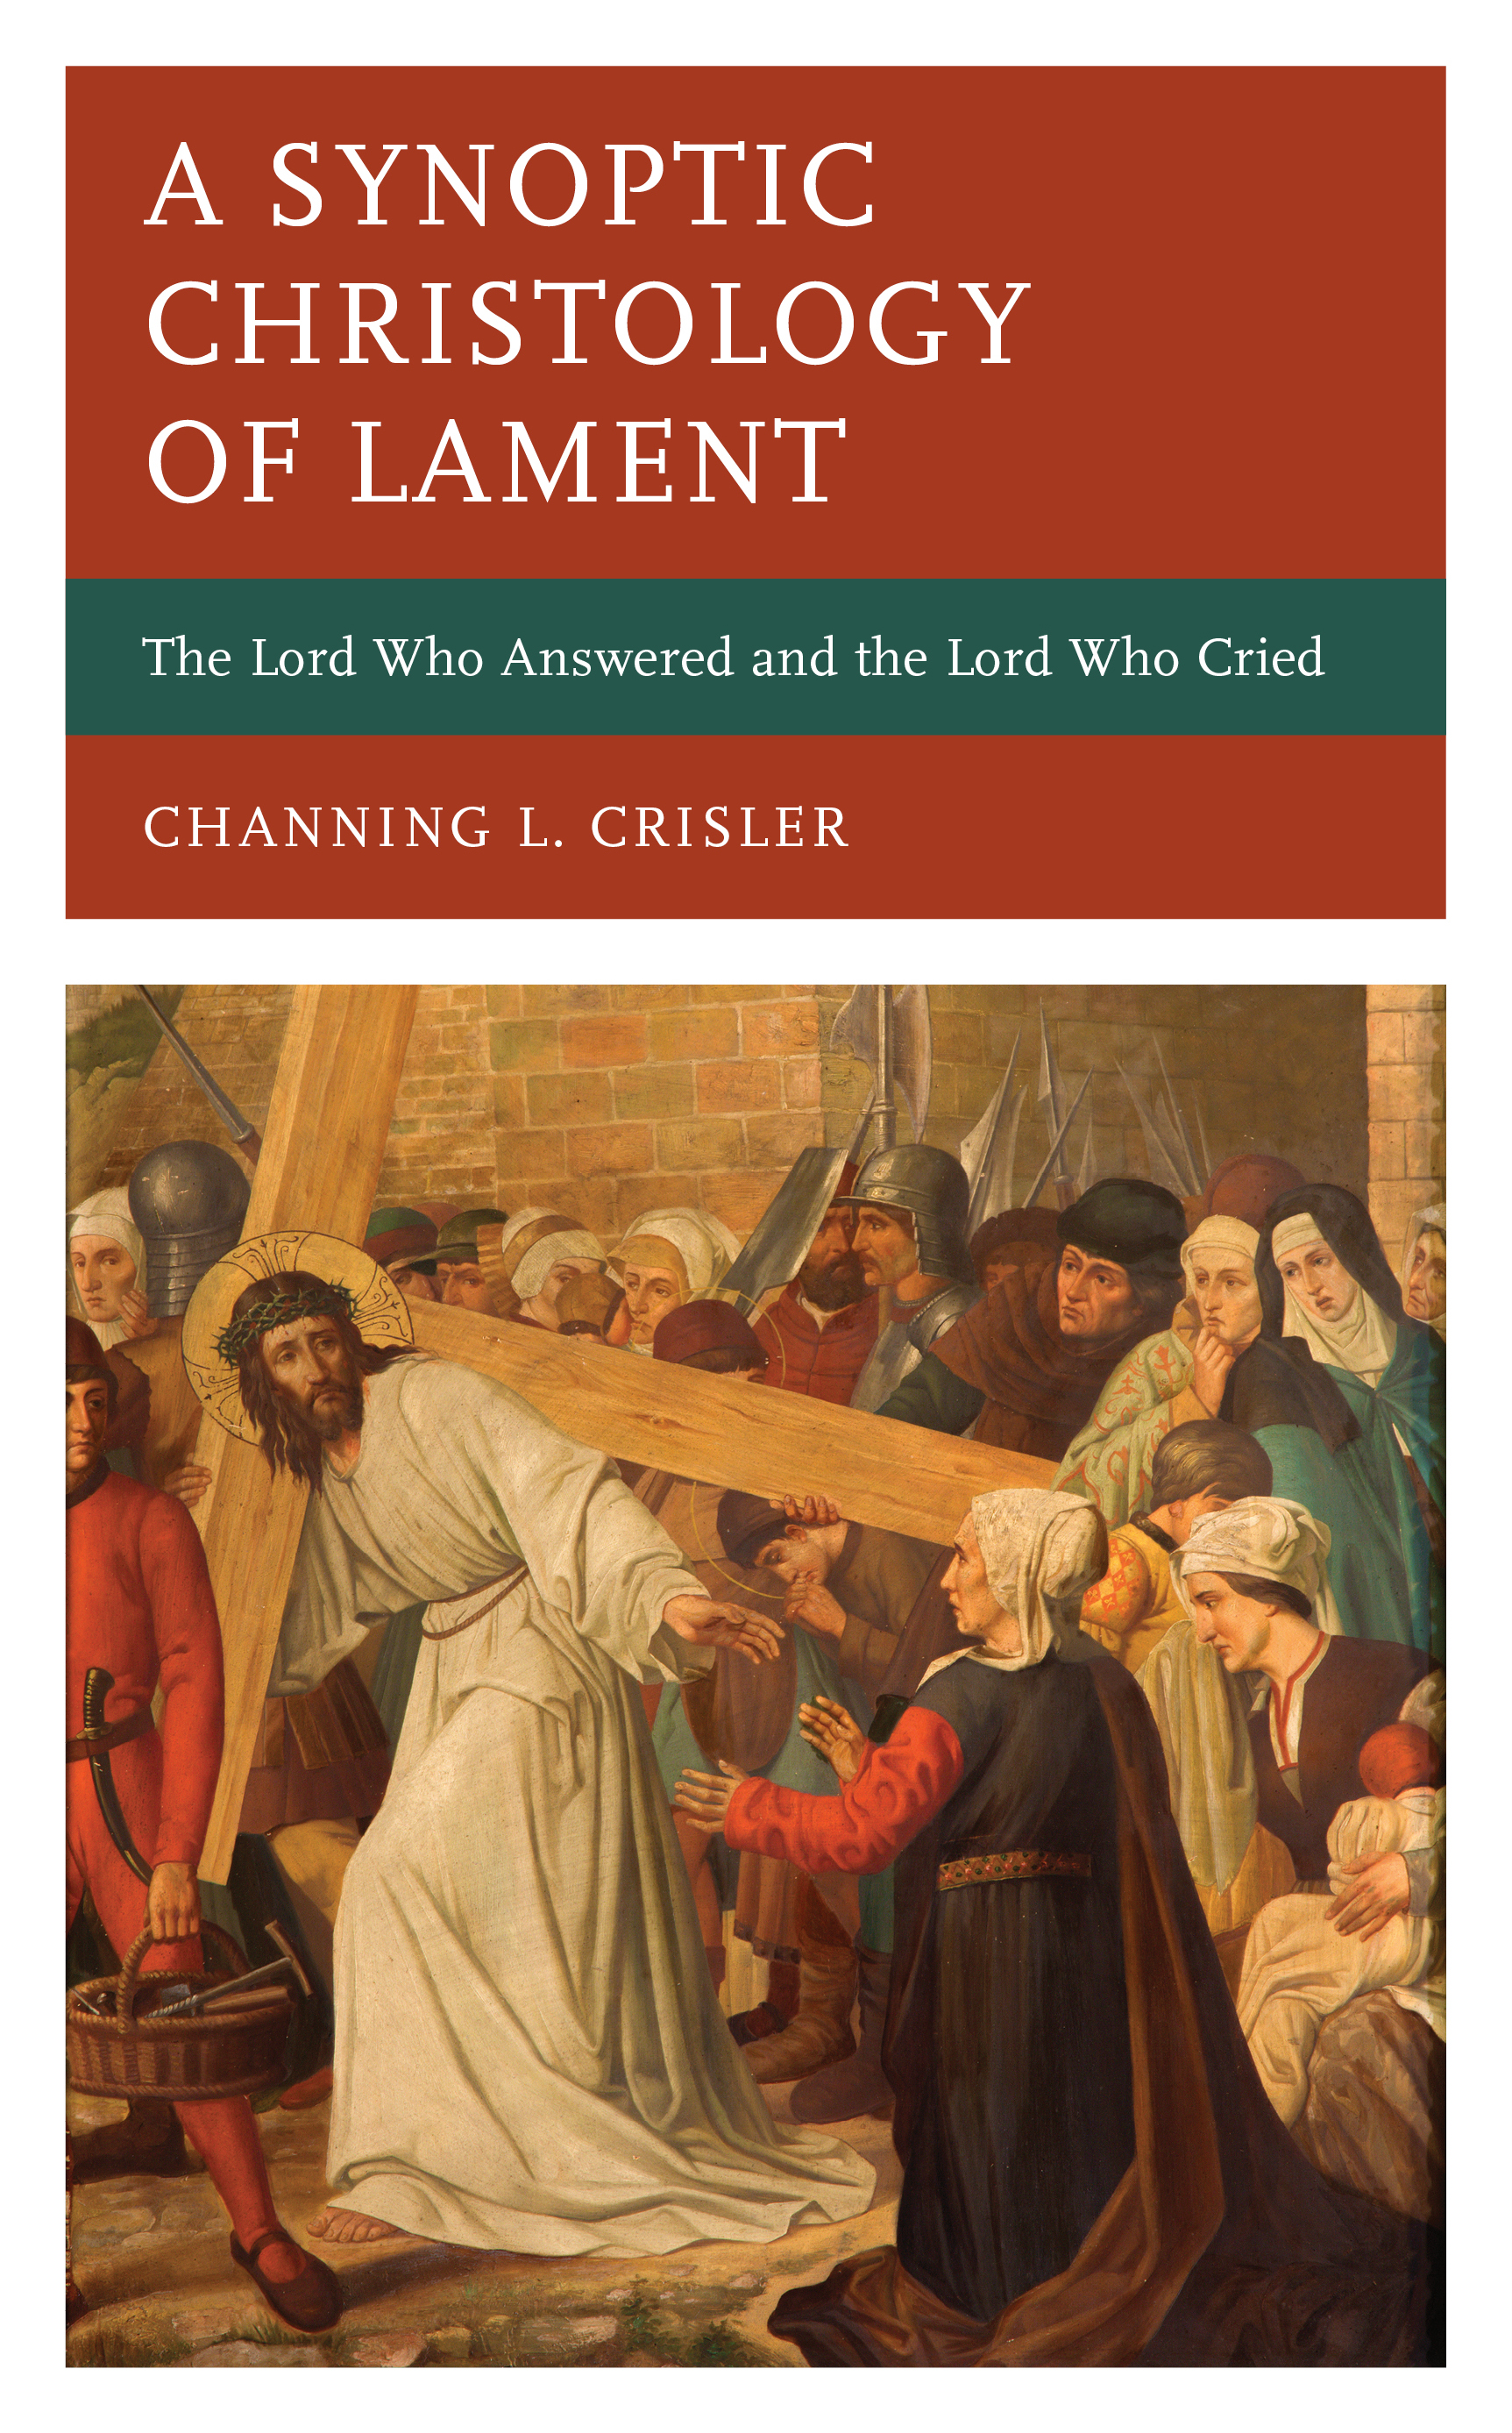 A Synoptic Christology of Lament: The Lord Who Answered and the Lord Who Cried